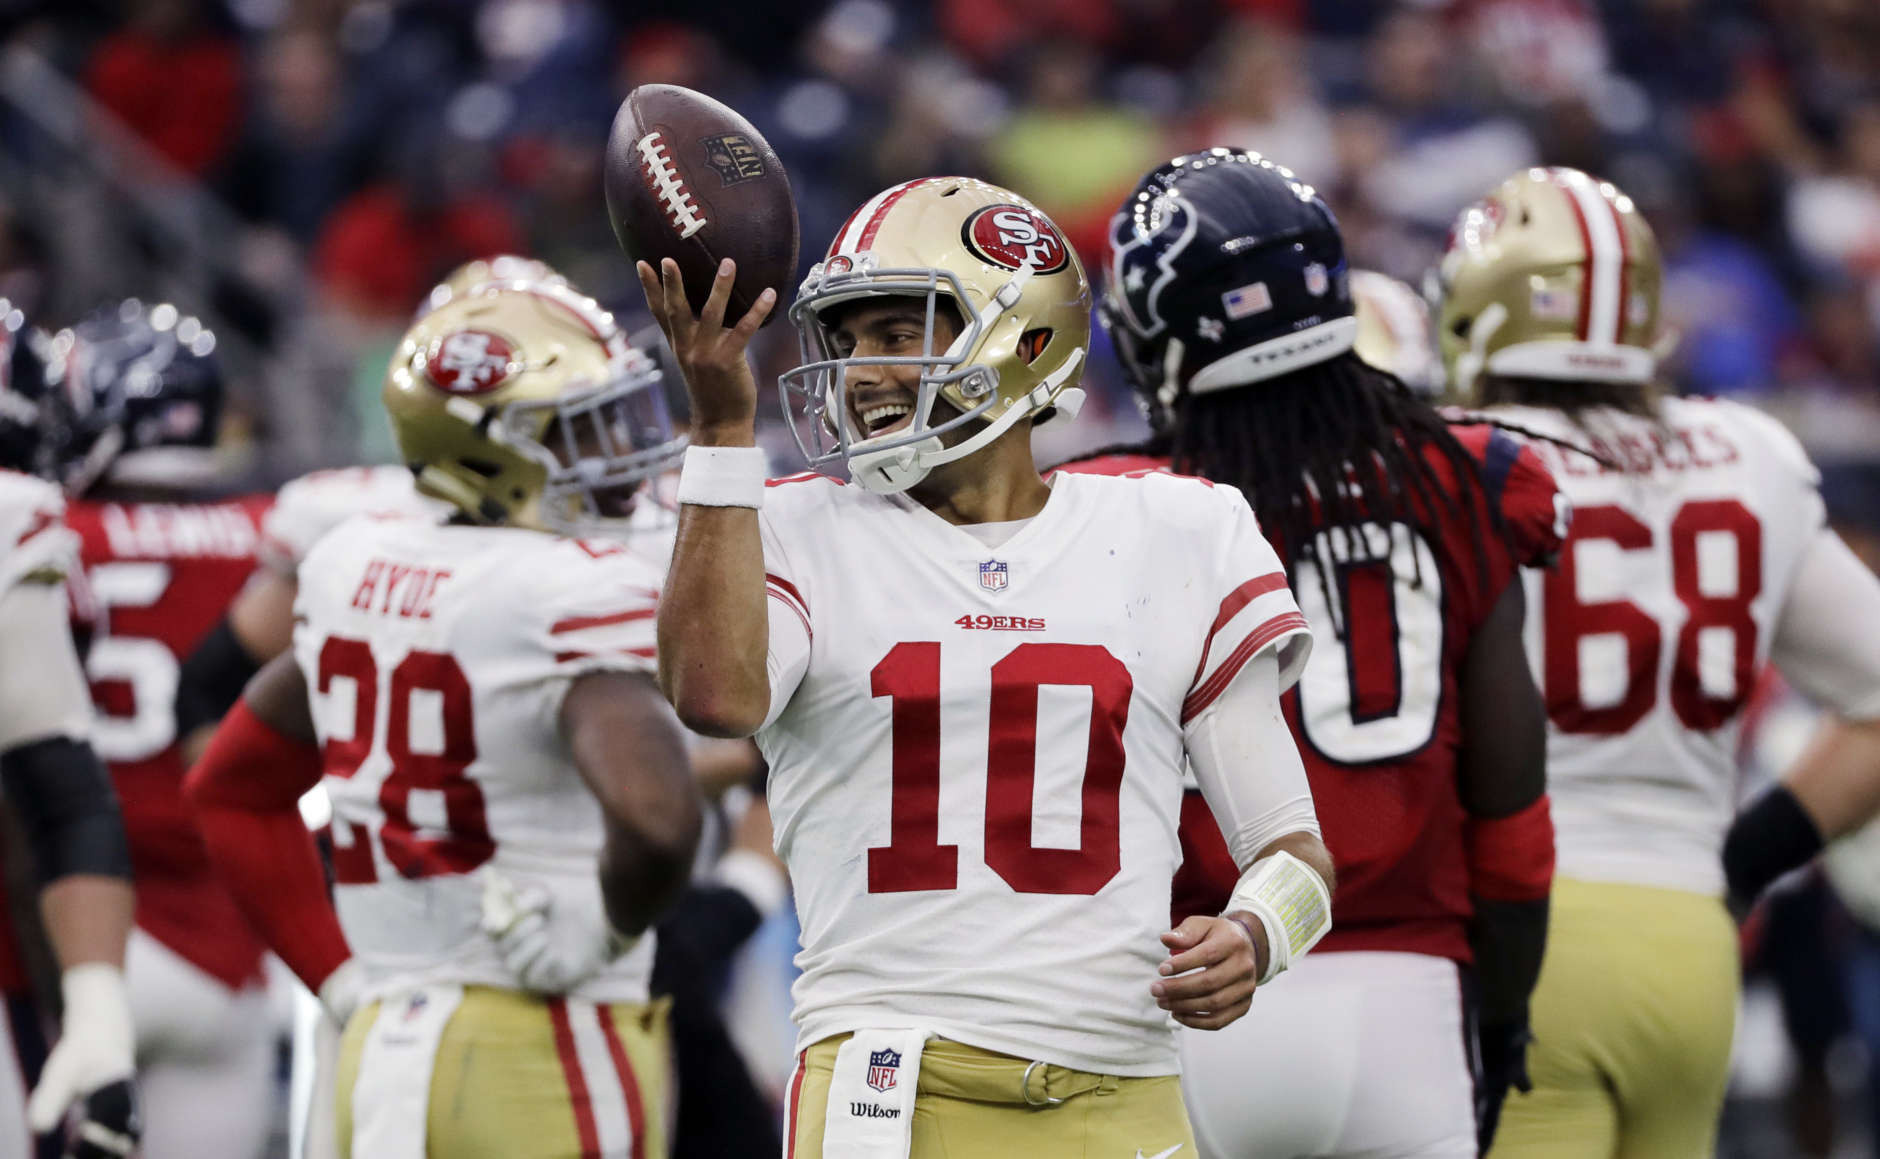 San Francisco 49ers quarterback Jimmy Garoppolo (10) smiles after a play during the second half of an NFL football game against the Houston Texans, Sunday, Dec. 10, 2017, in Houston. San Francisco won 26-16. (AP Photo/David J. Phillip)